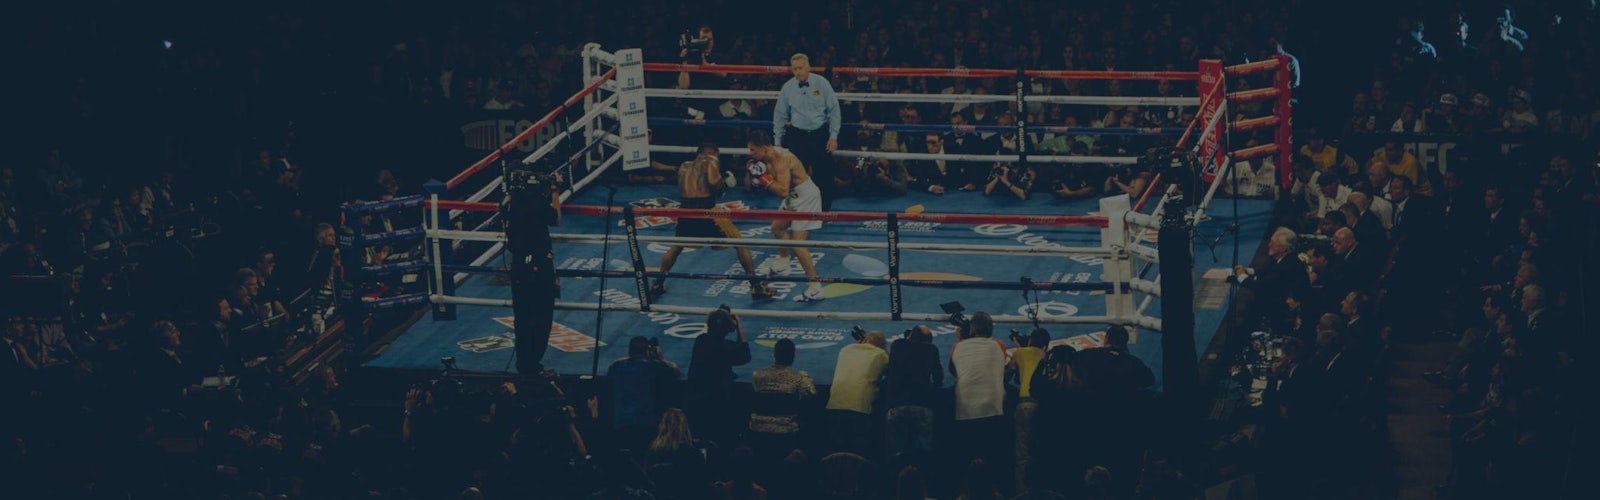 Boxing betting sites cover image showing boxing fight in arena